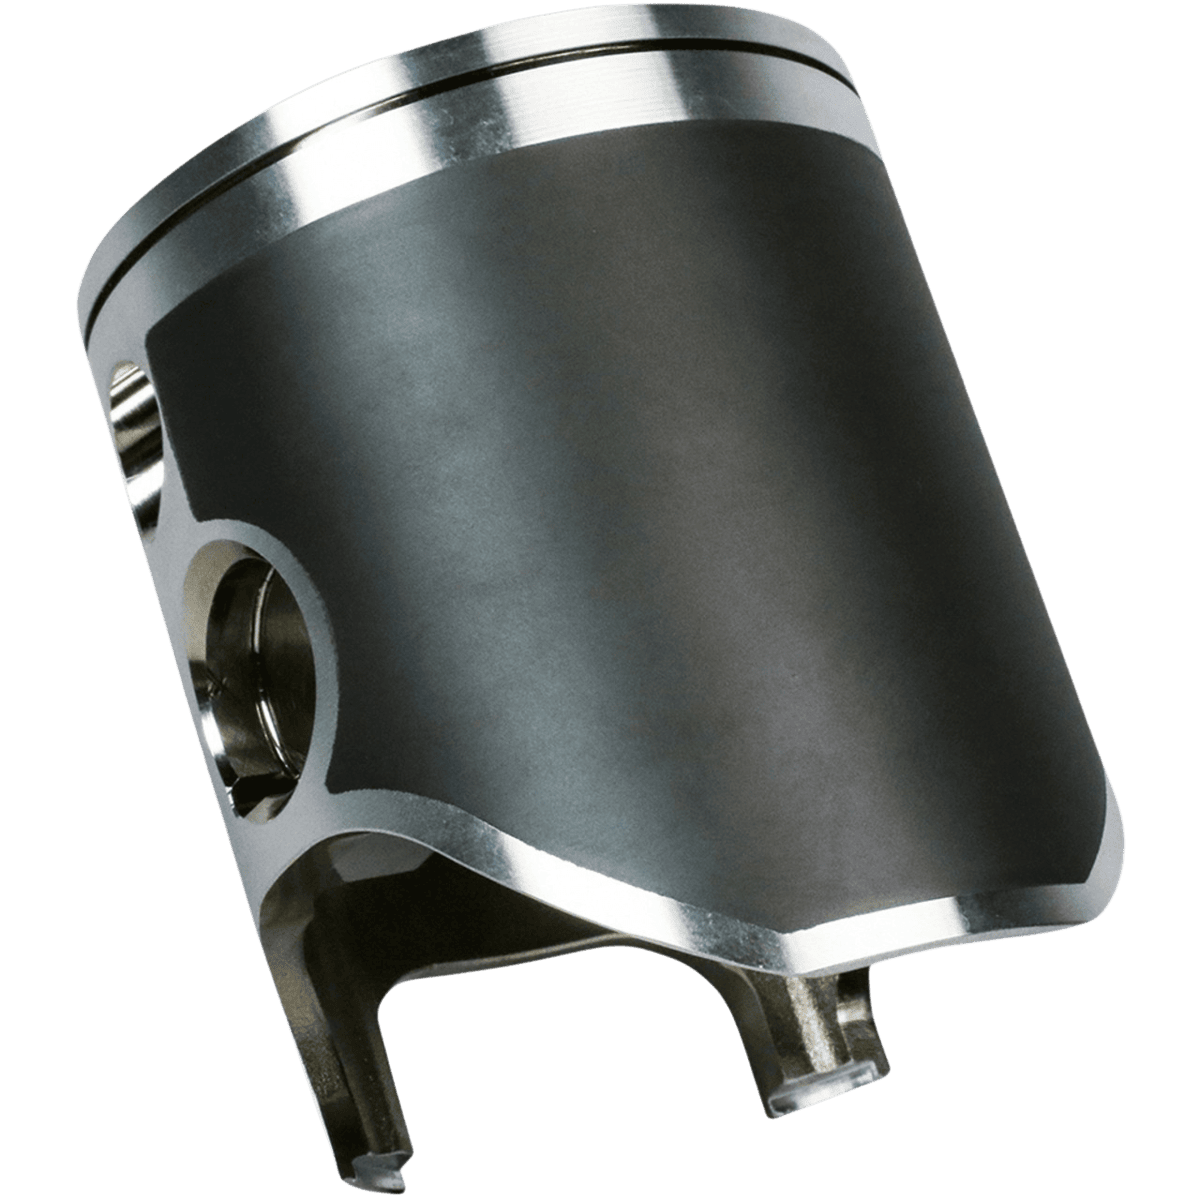 Best 1985 WR400 Piston Kit for Two strokes